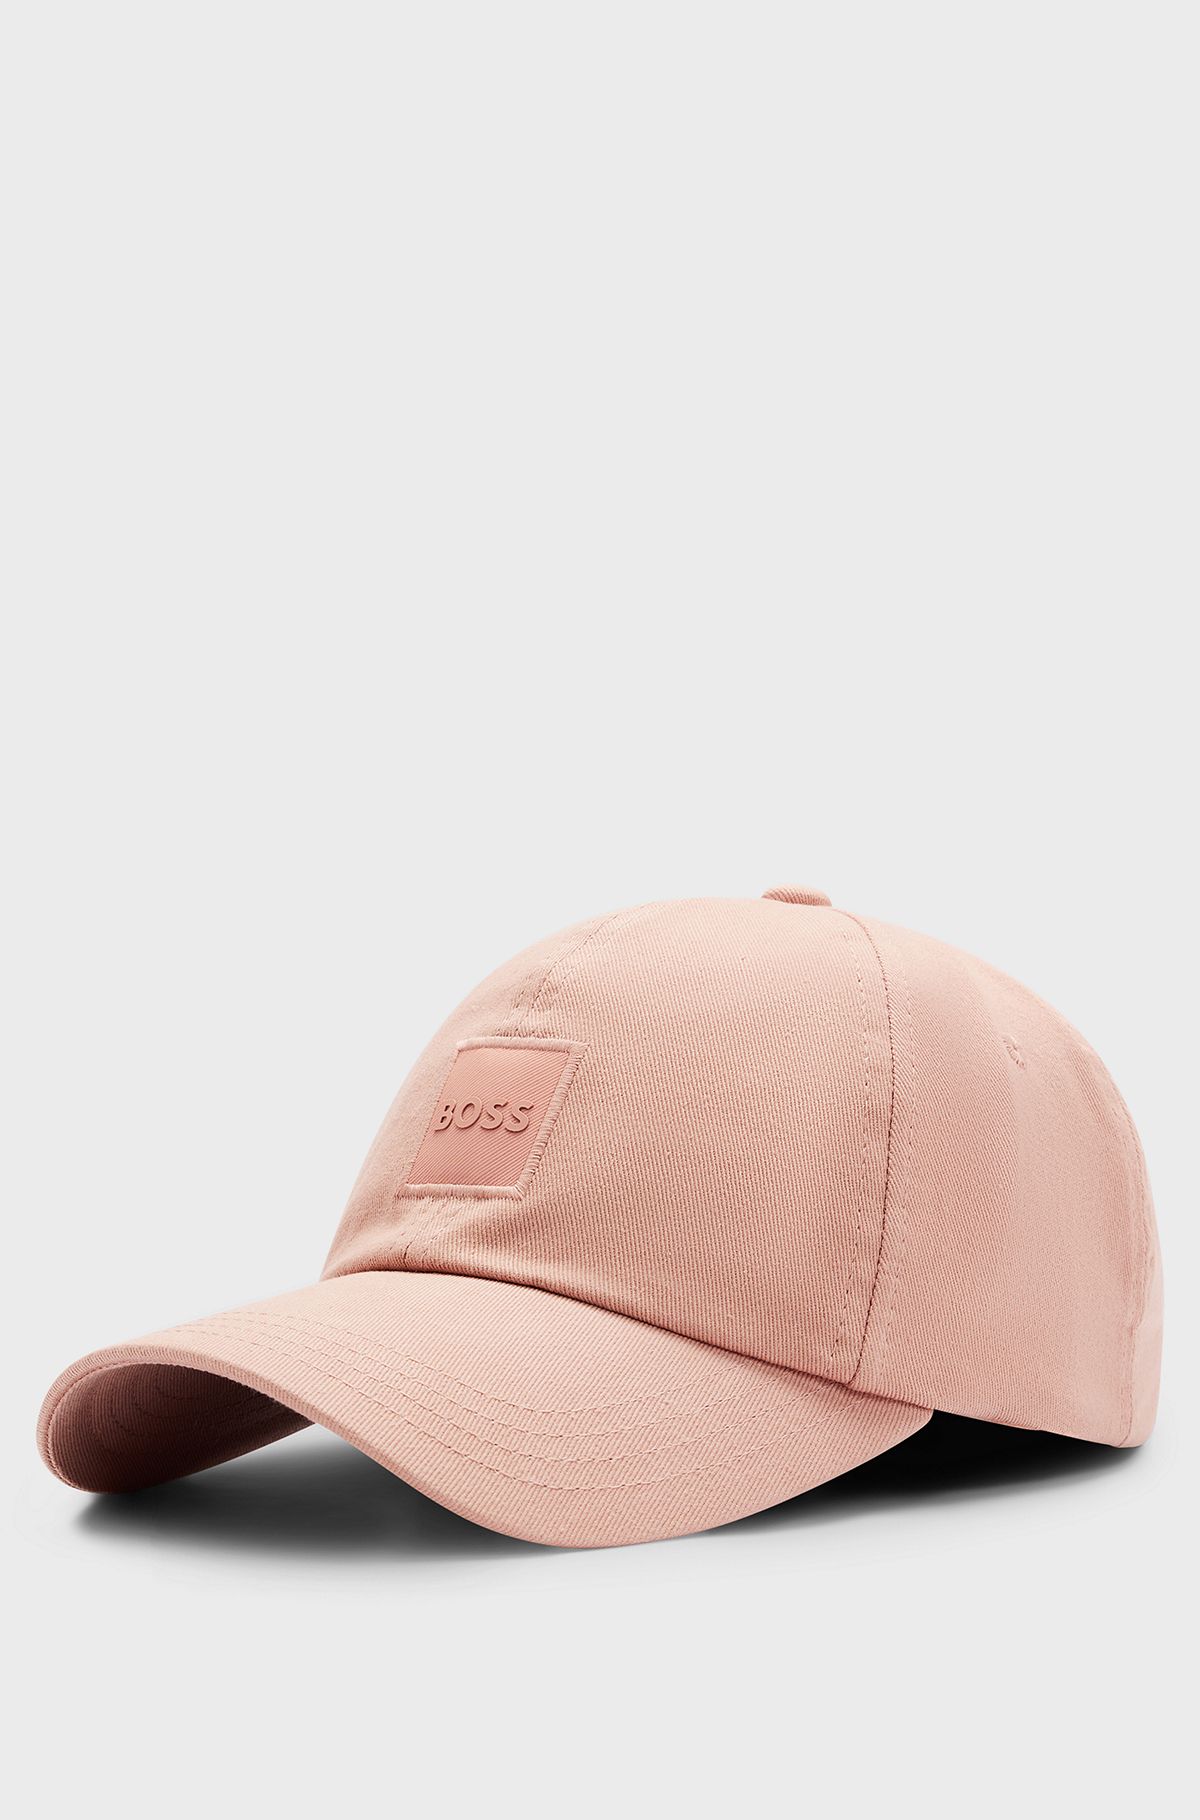 Cotton-twill cap with tonal logo patch, light pink